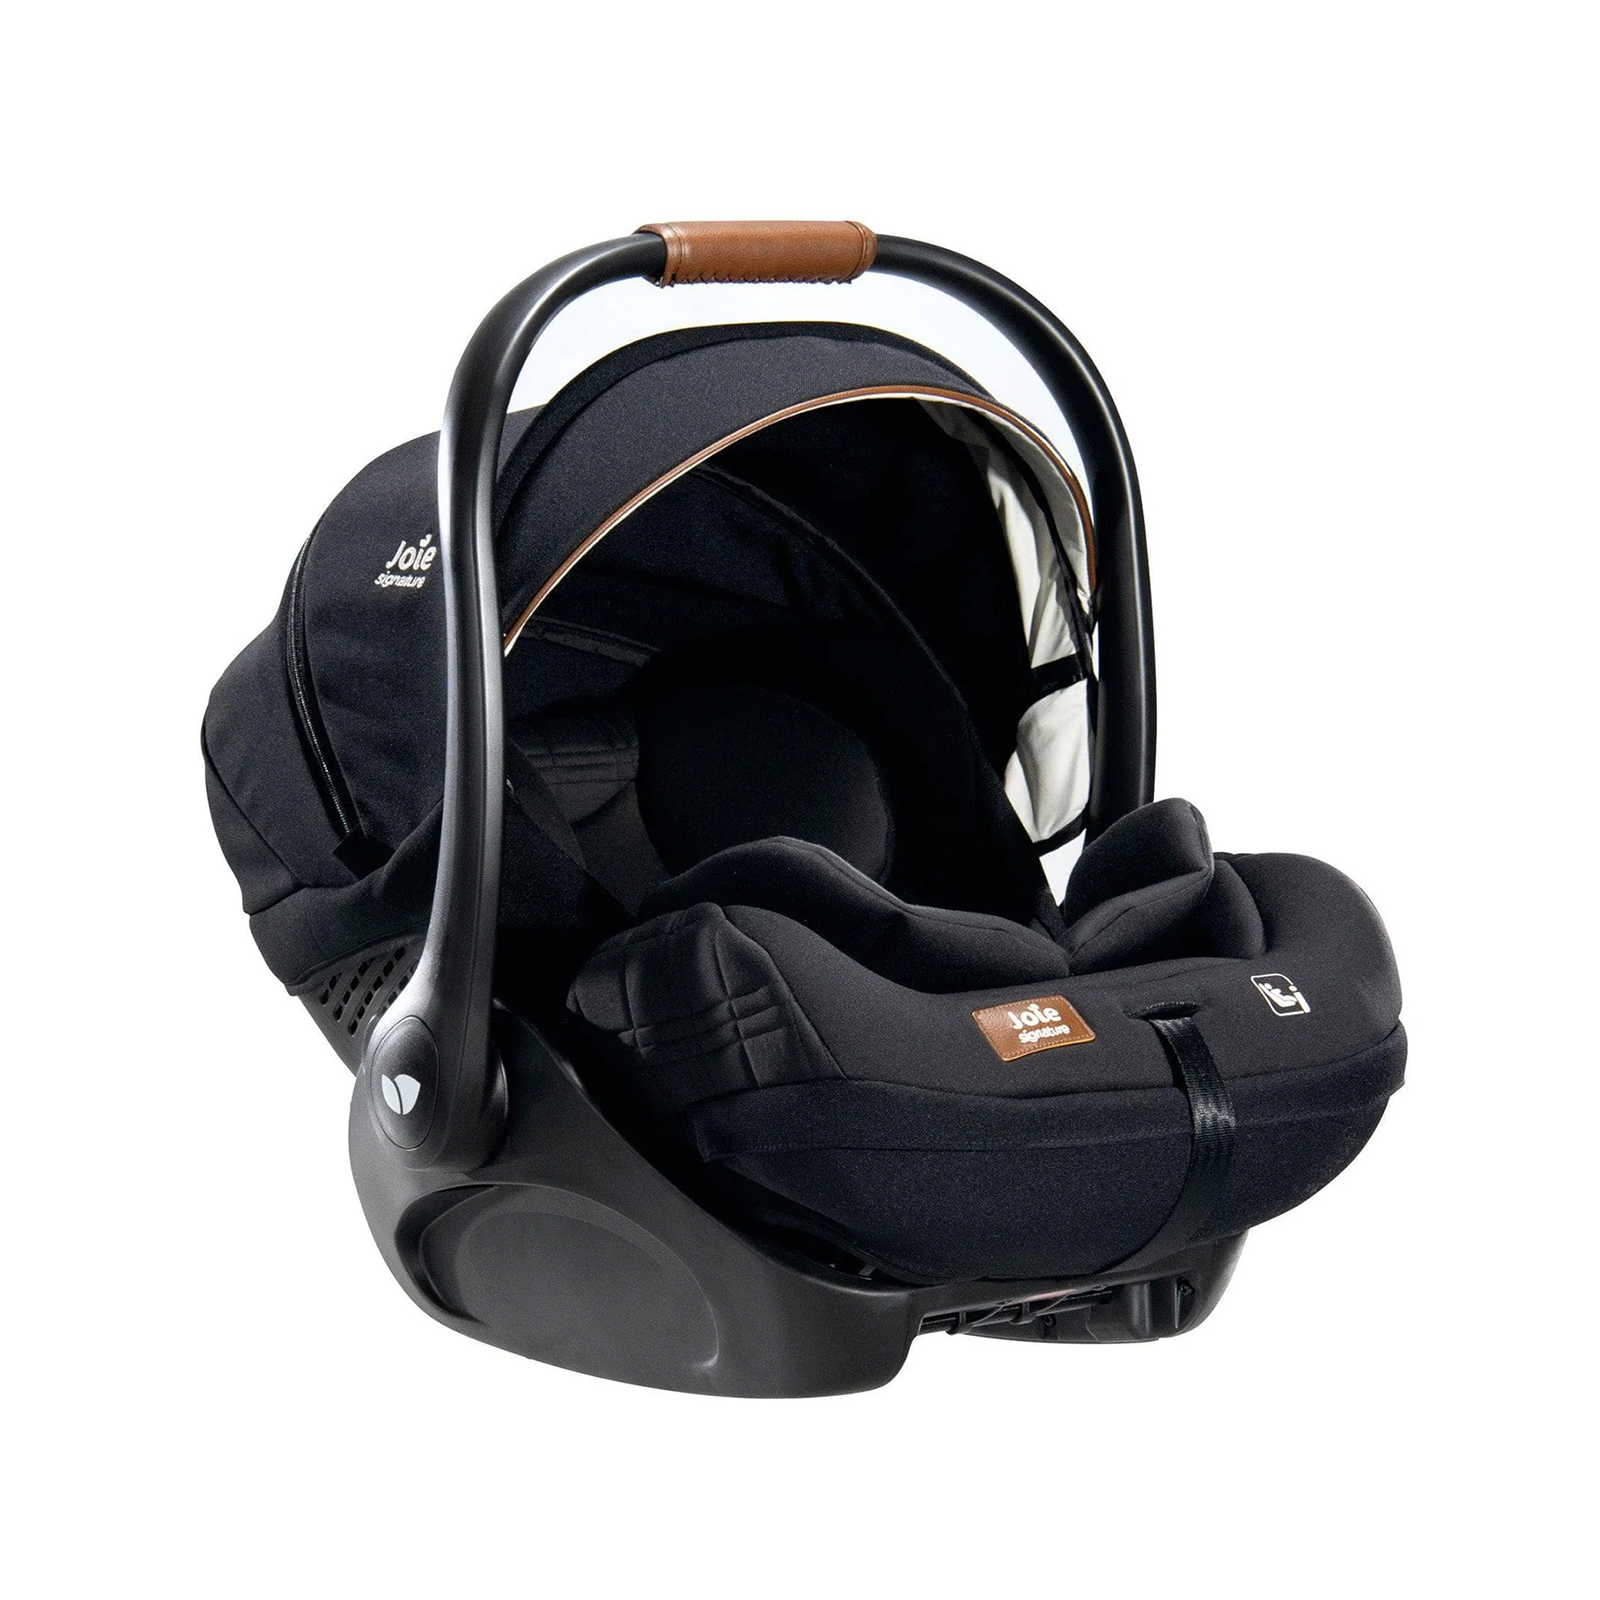 Joie i-Level Recline i-Size Group 0+ (Birth - 15 Months) Infant Car Seat - Eclipse